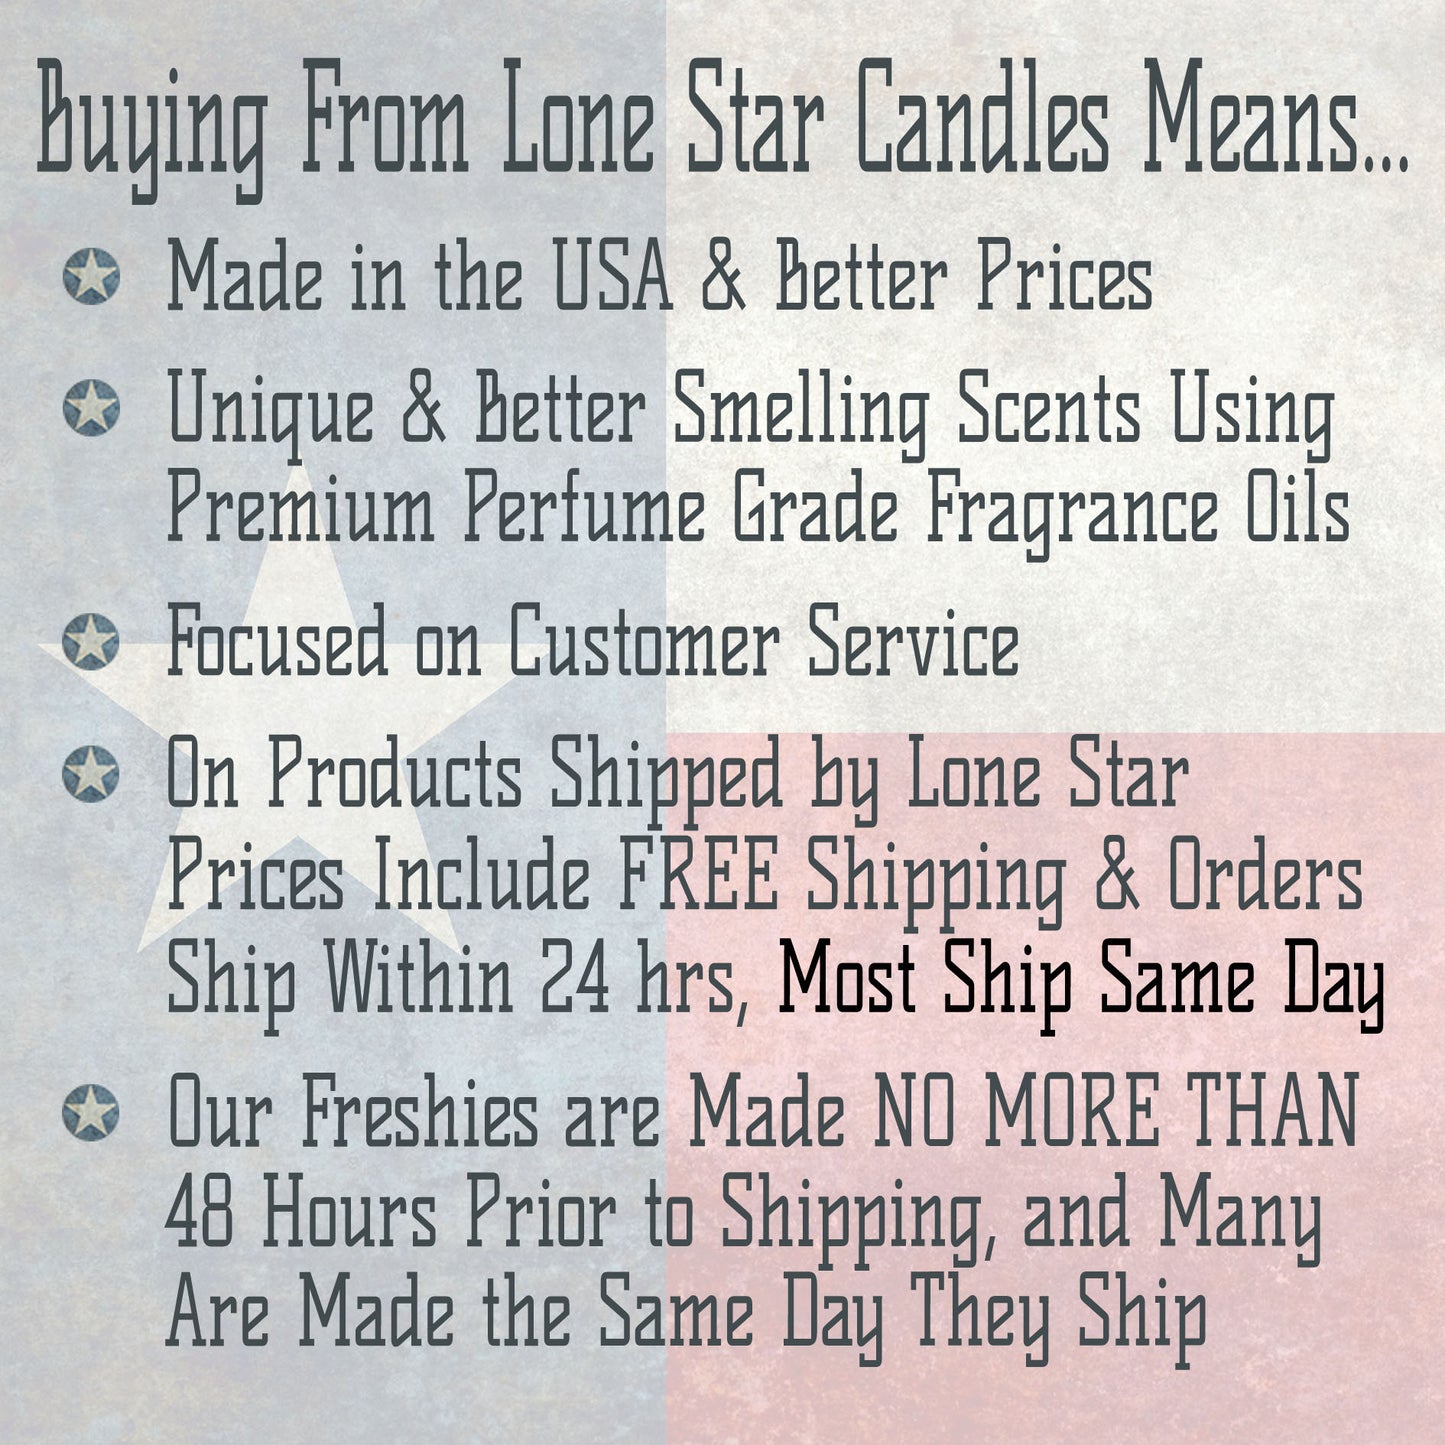 Cranberries & Sandalwood, Lone Star Candles & More's Premium Strongly Scented Freshies, A Delightful Mix of Spiced Cranberry, & Sandalwood, Car & Air Freshener, USA Made in Texas, Truck & Tree 1-Pack